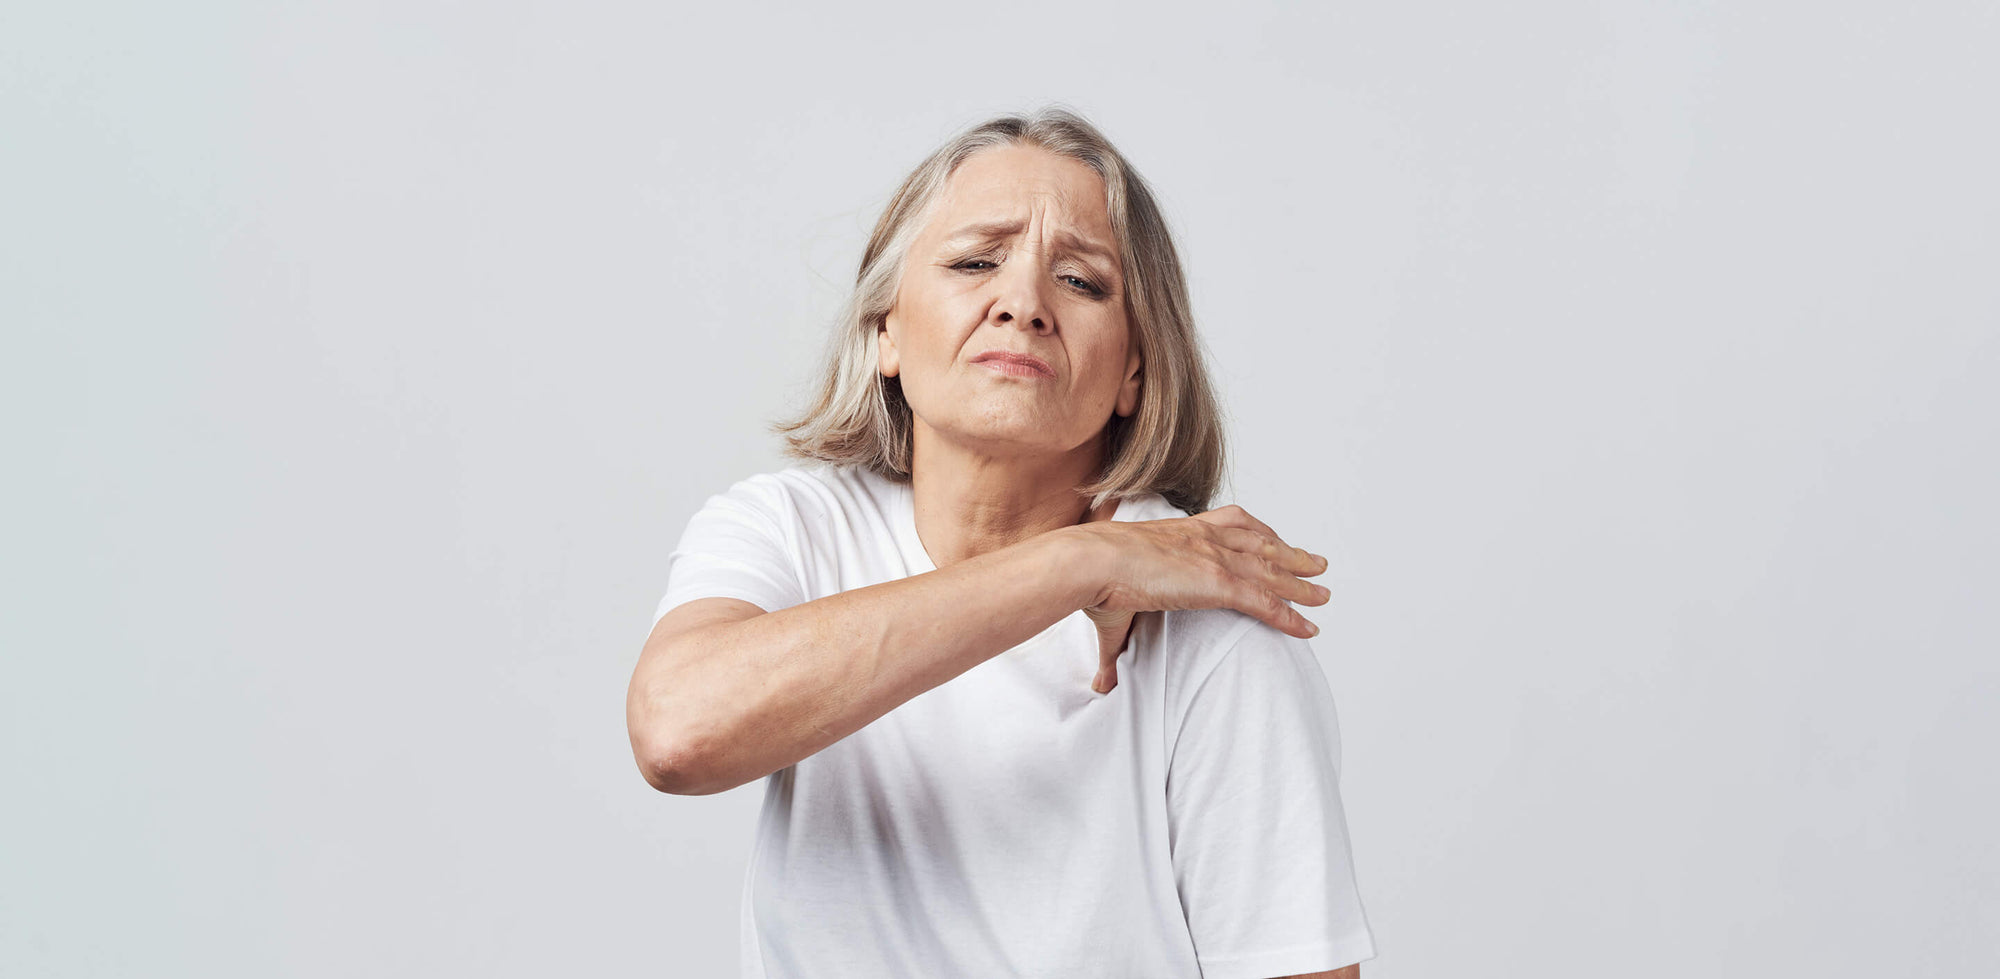 A woman holding her hand on her aching shoulder.